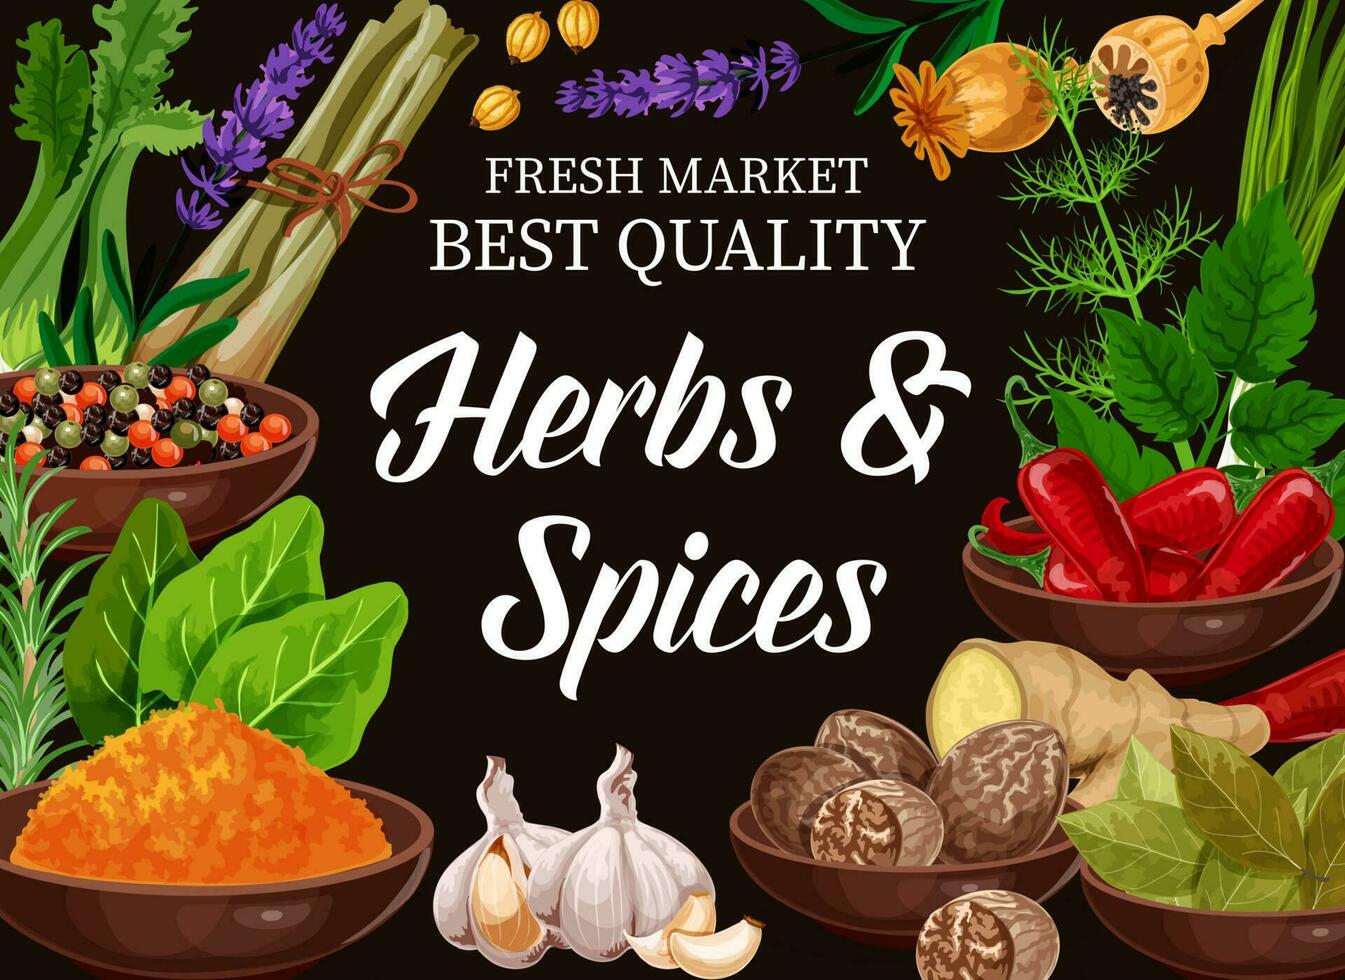 Herbs seasonings, spices and cooking condiments vector